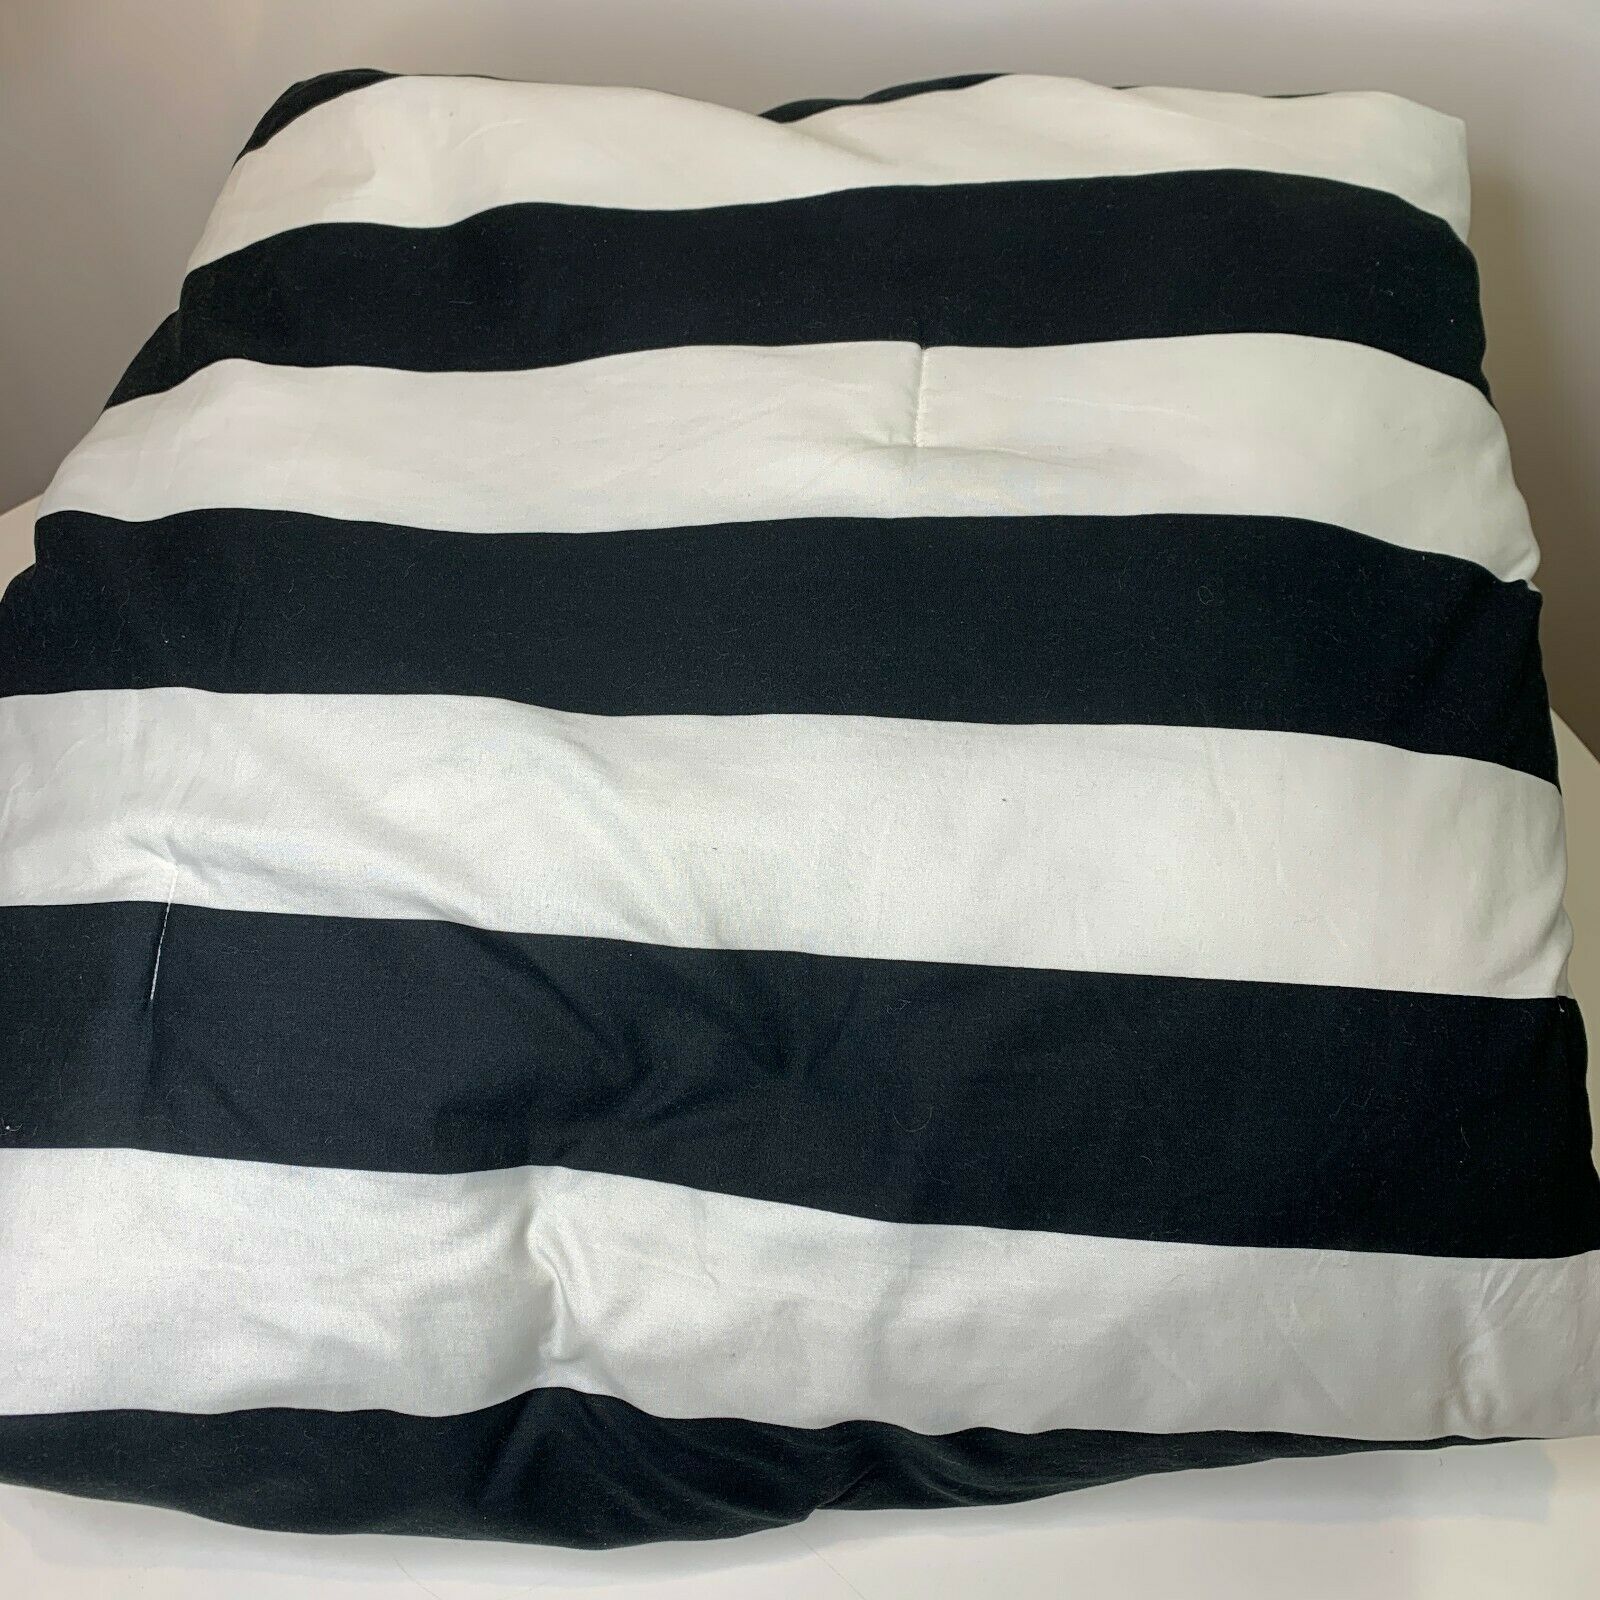 Juicy Couture Comforter Reversible Black White Stripe Pink Modern Full Queen